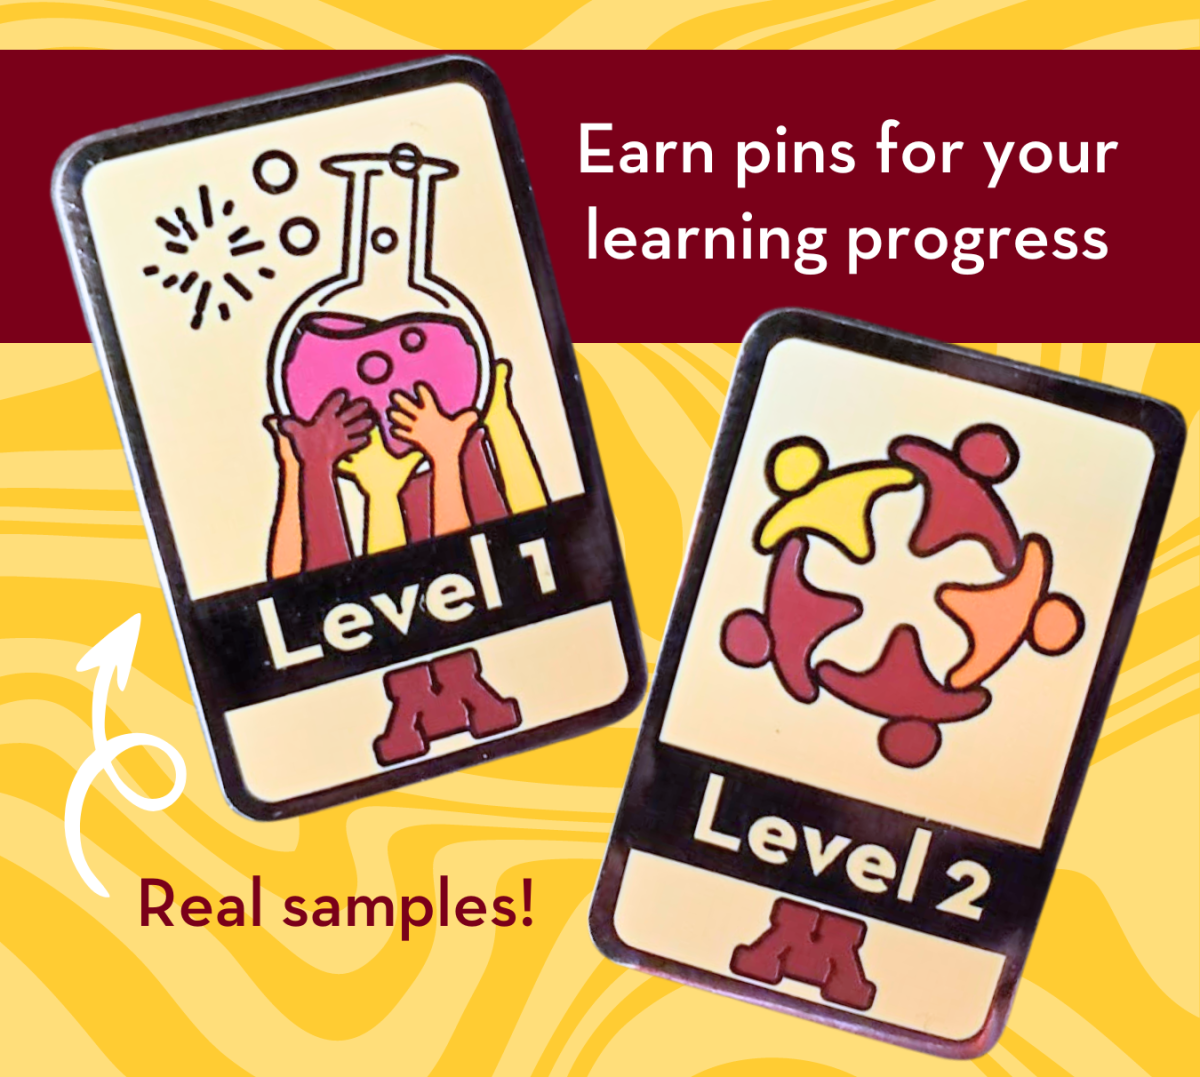 earn pins for your learning progress!